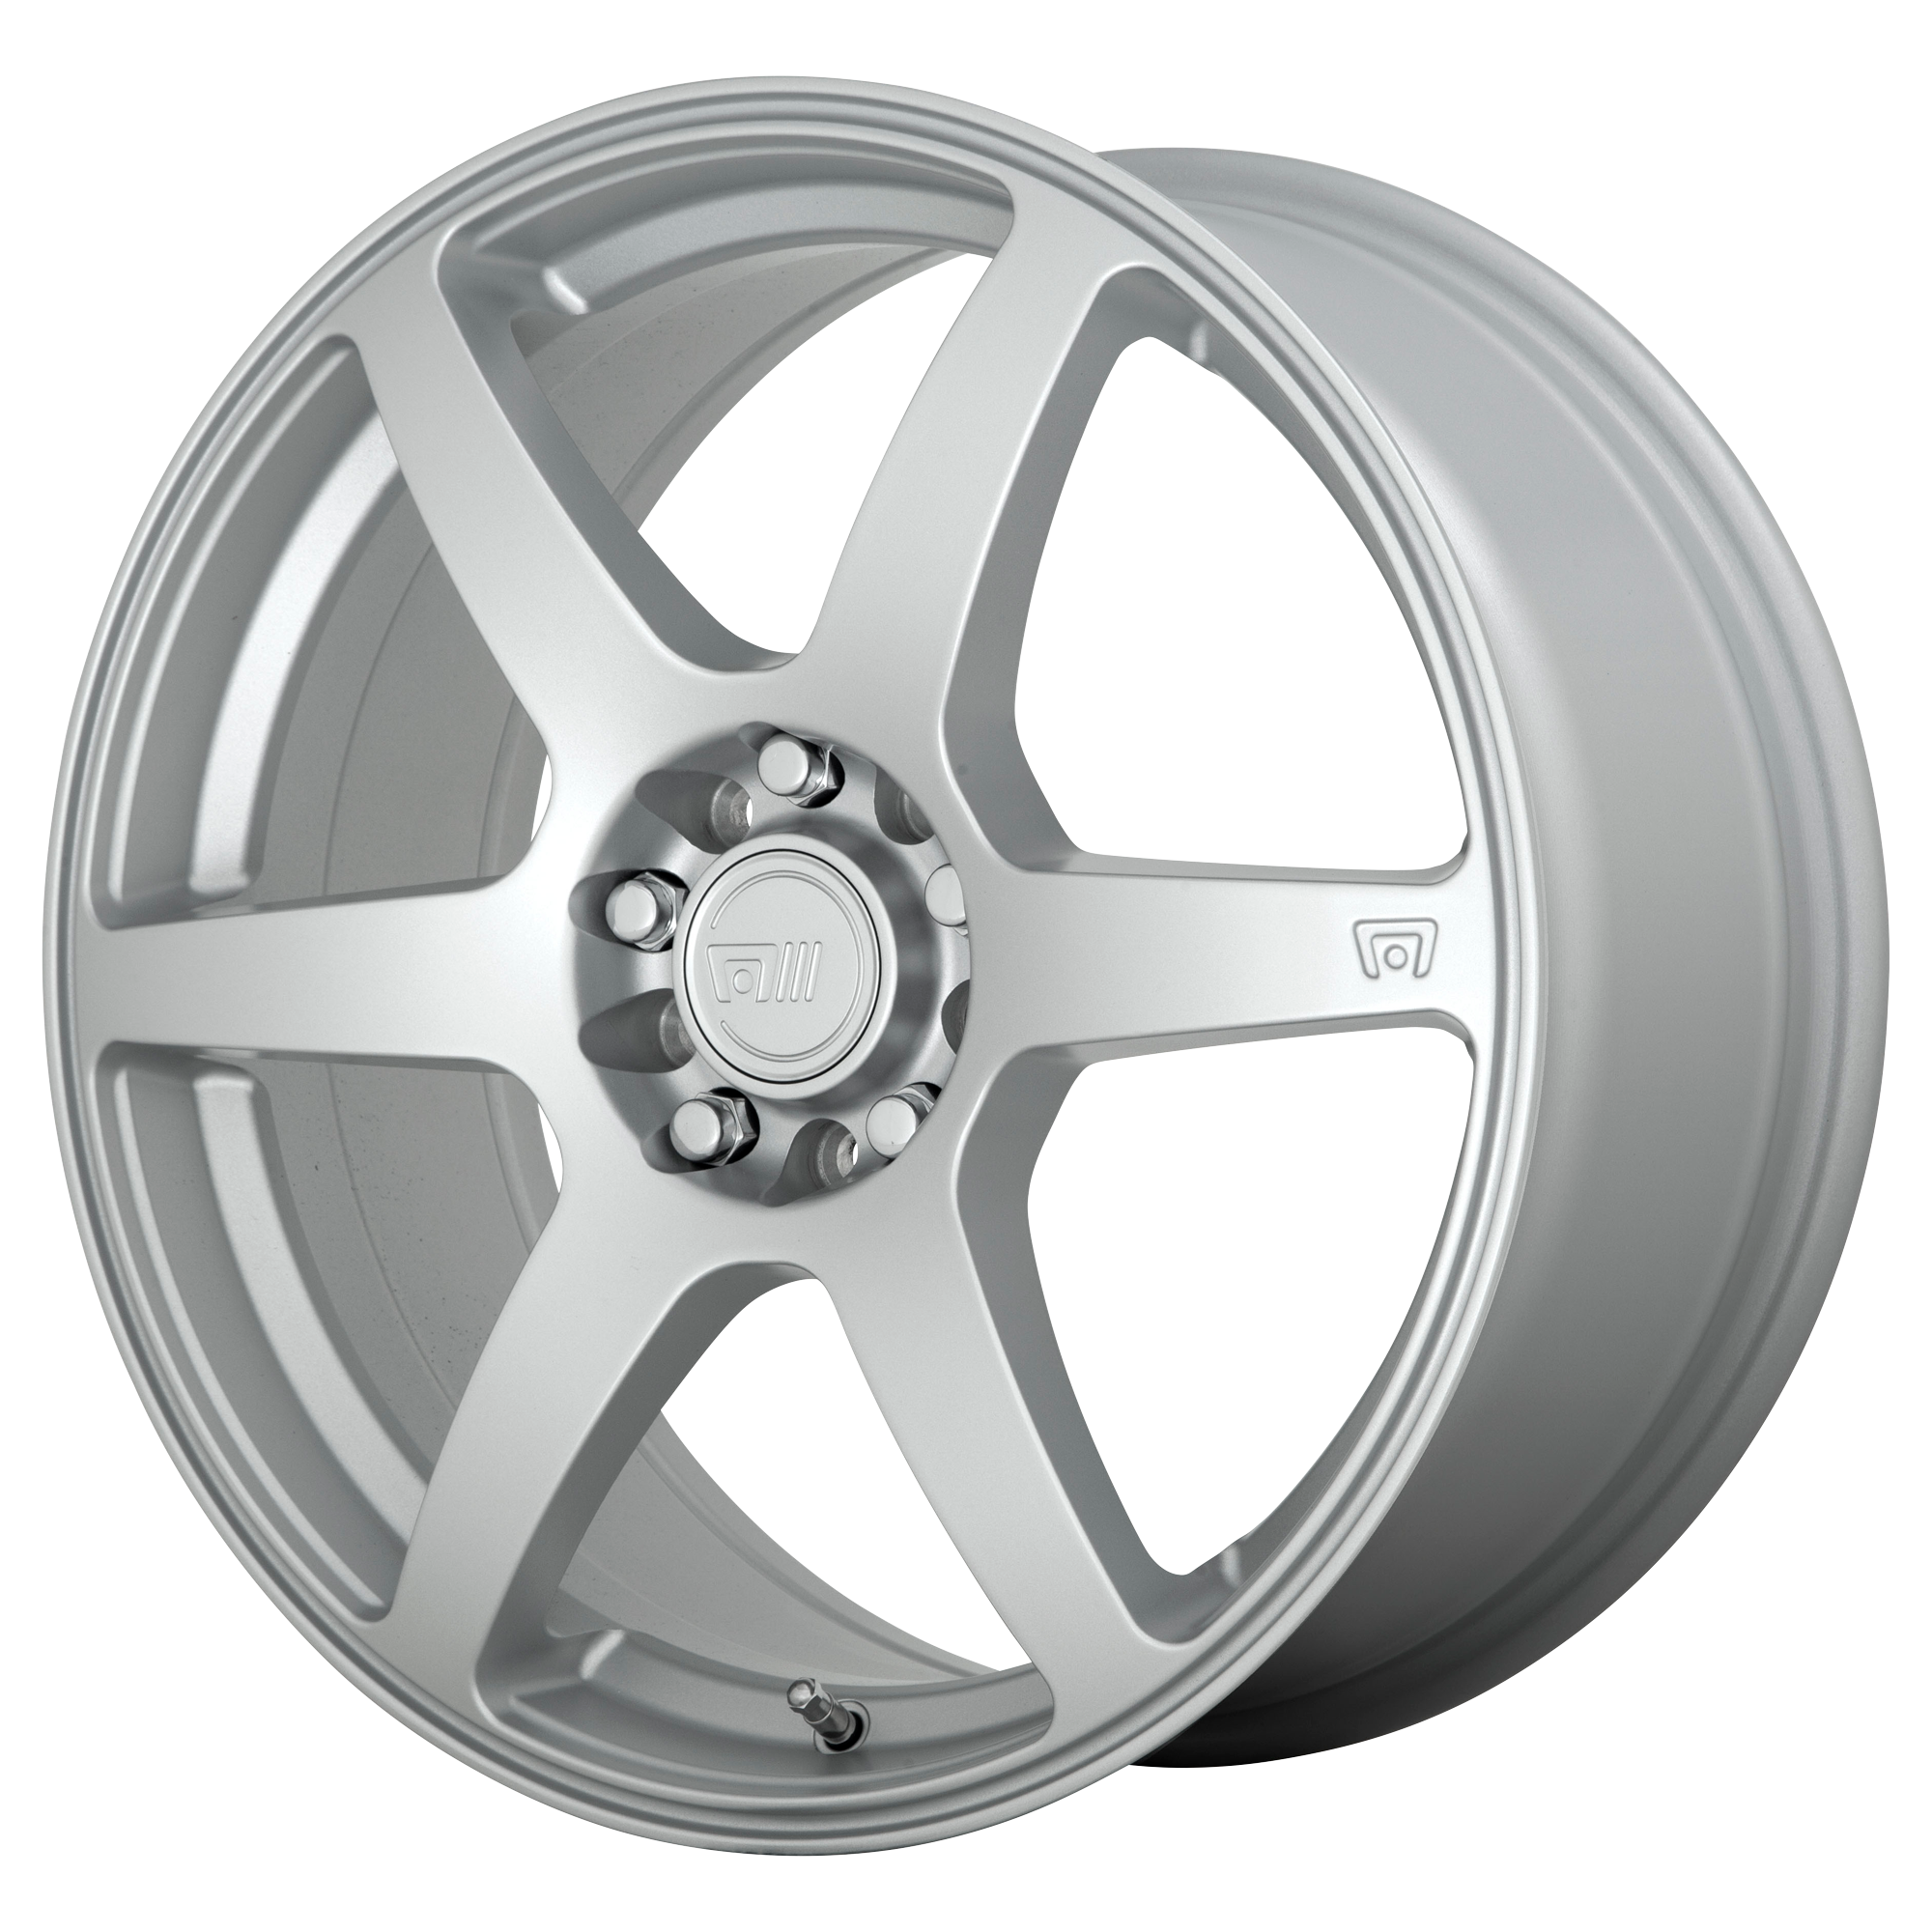 CS6 17x7 5x108.00/5x114.30 HYPER SILVER (40 mm) - Tires and Engine Performance